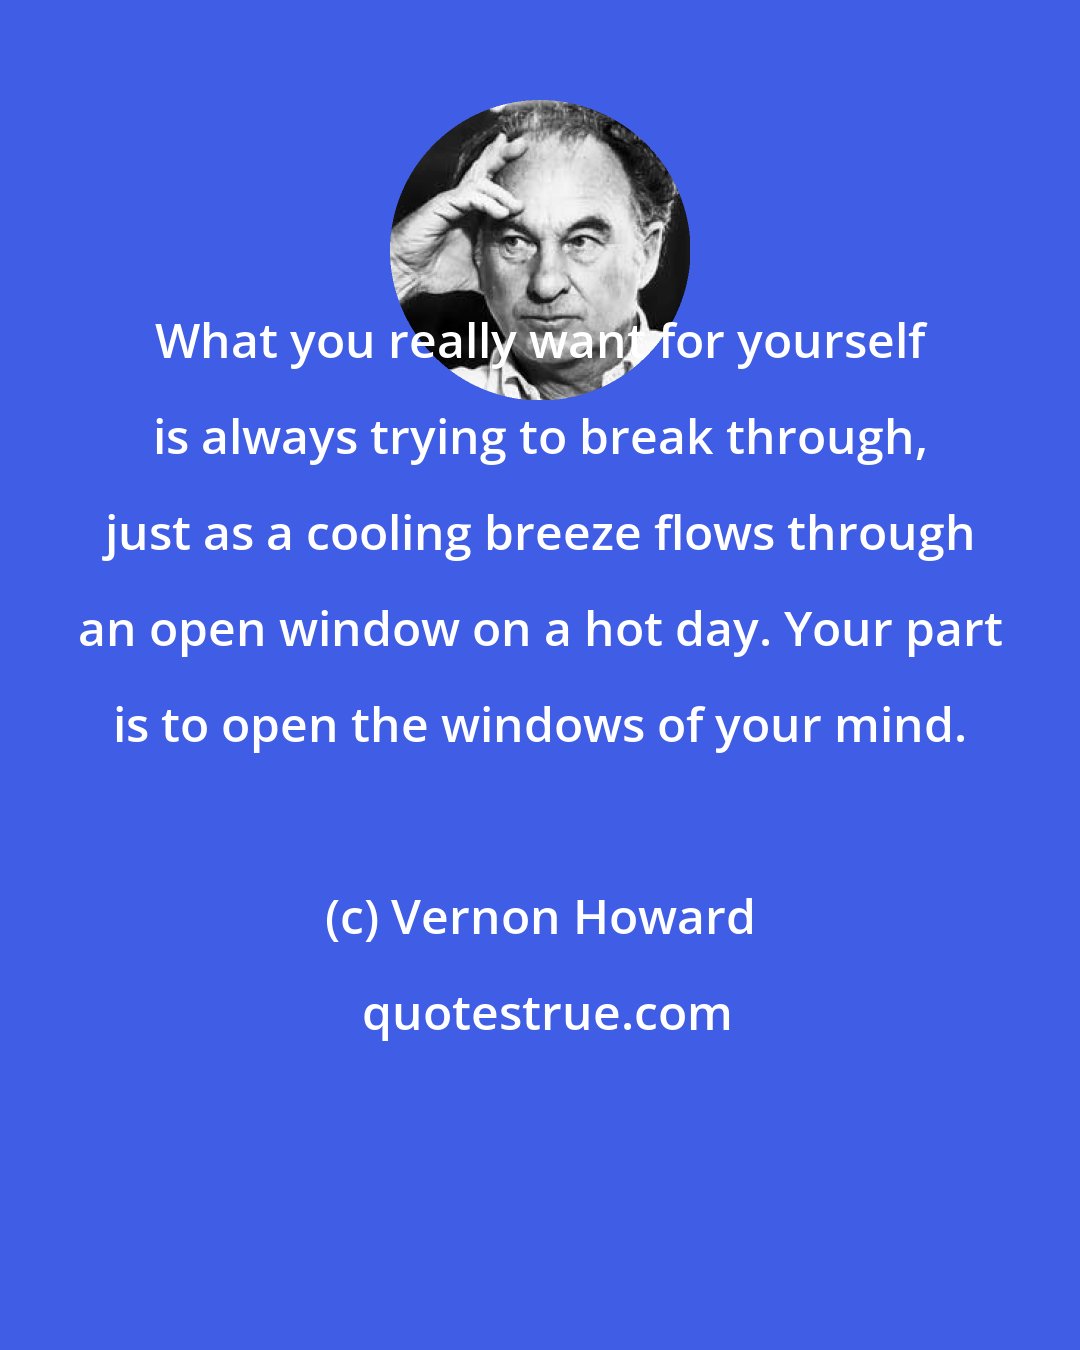 Vernon Howard: What you really want for yourself is always trying to break through, just as a cooling breeze flows through an open window on a hot day. Your part is to open the windows of your mind.